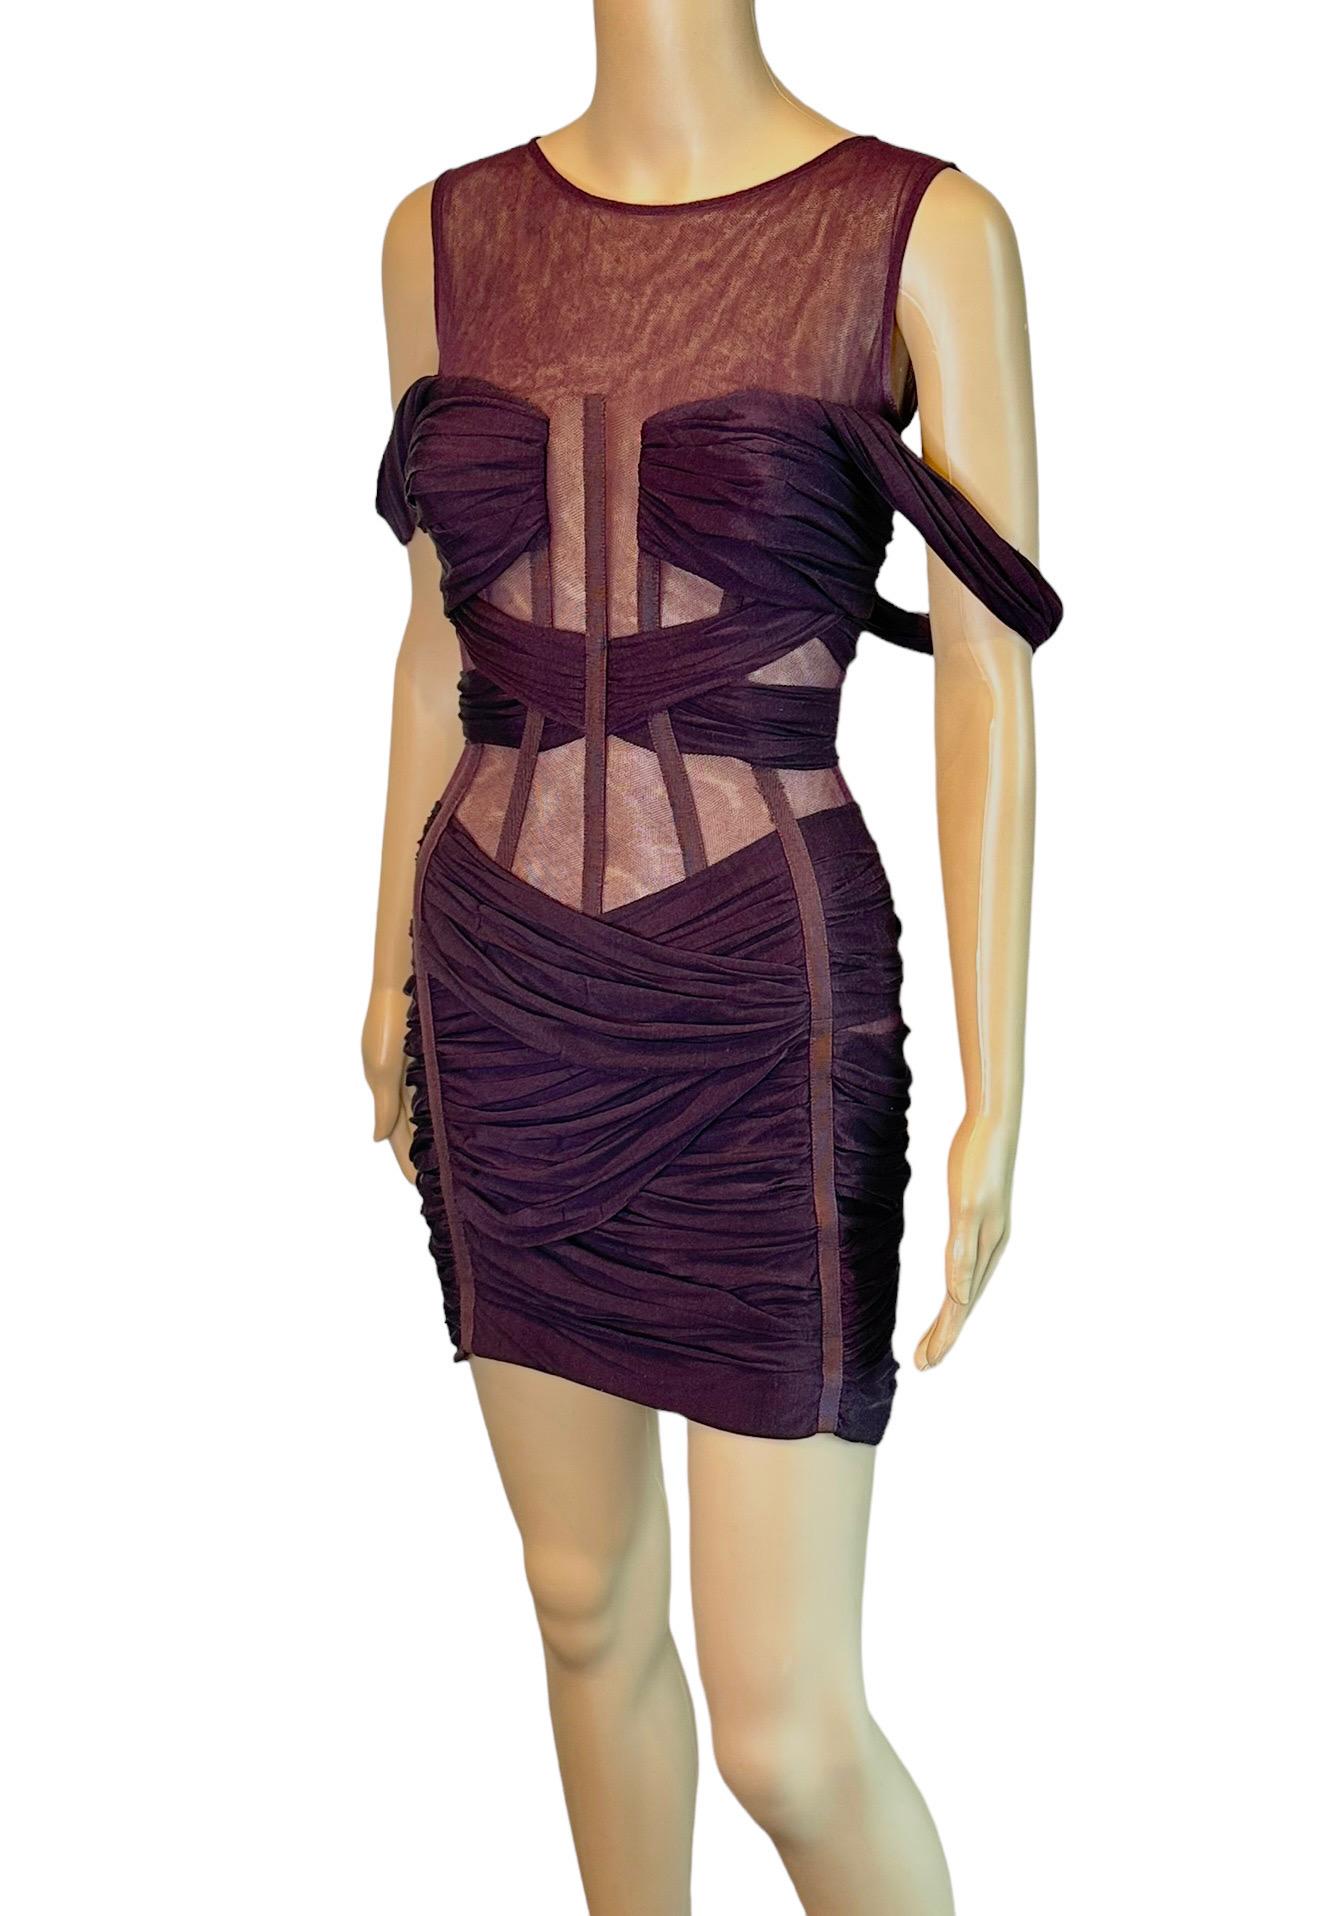 Dolce & Gabbana Cutout Sheer Mesh Panels Off-Shoulder Ruched Mini Dress IT 40

Excellent Condition

FOLLOW US ON INSTAGRAM @OPULENTADDICT